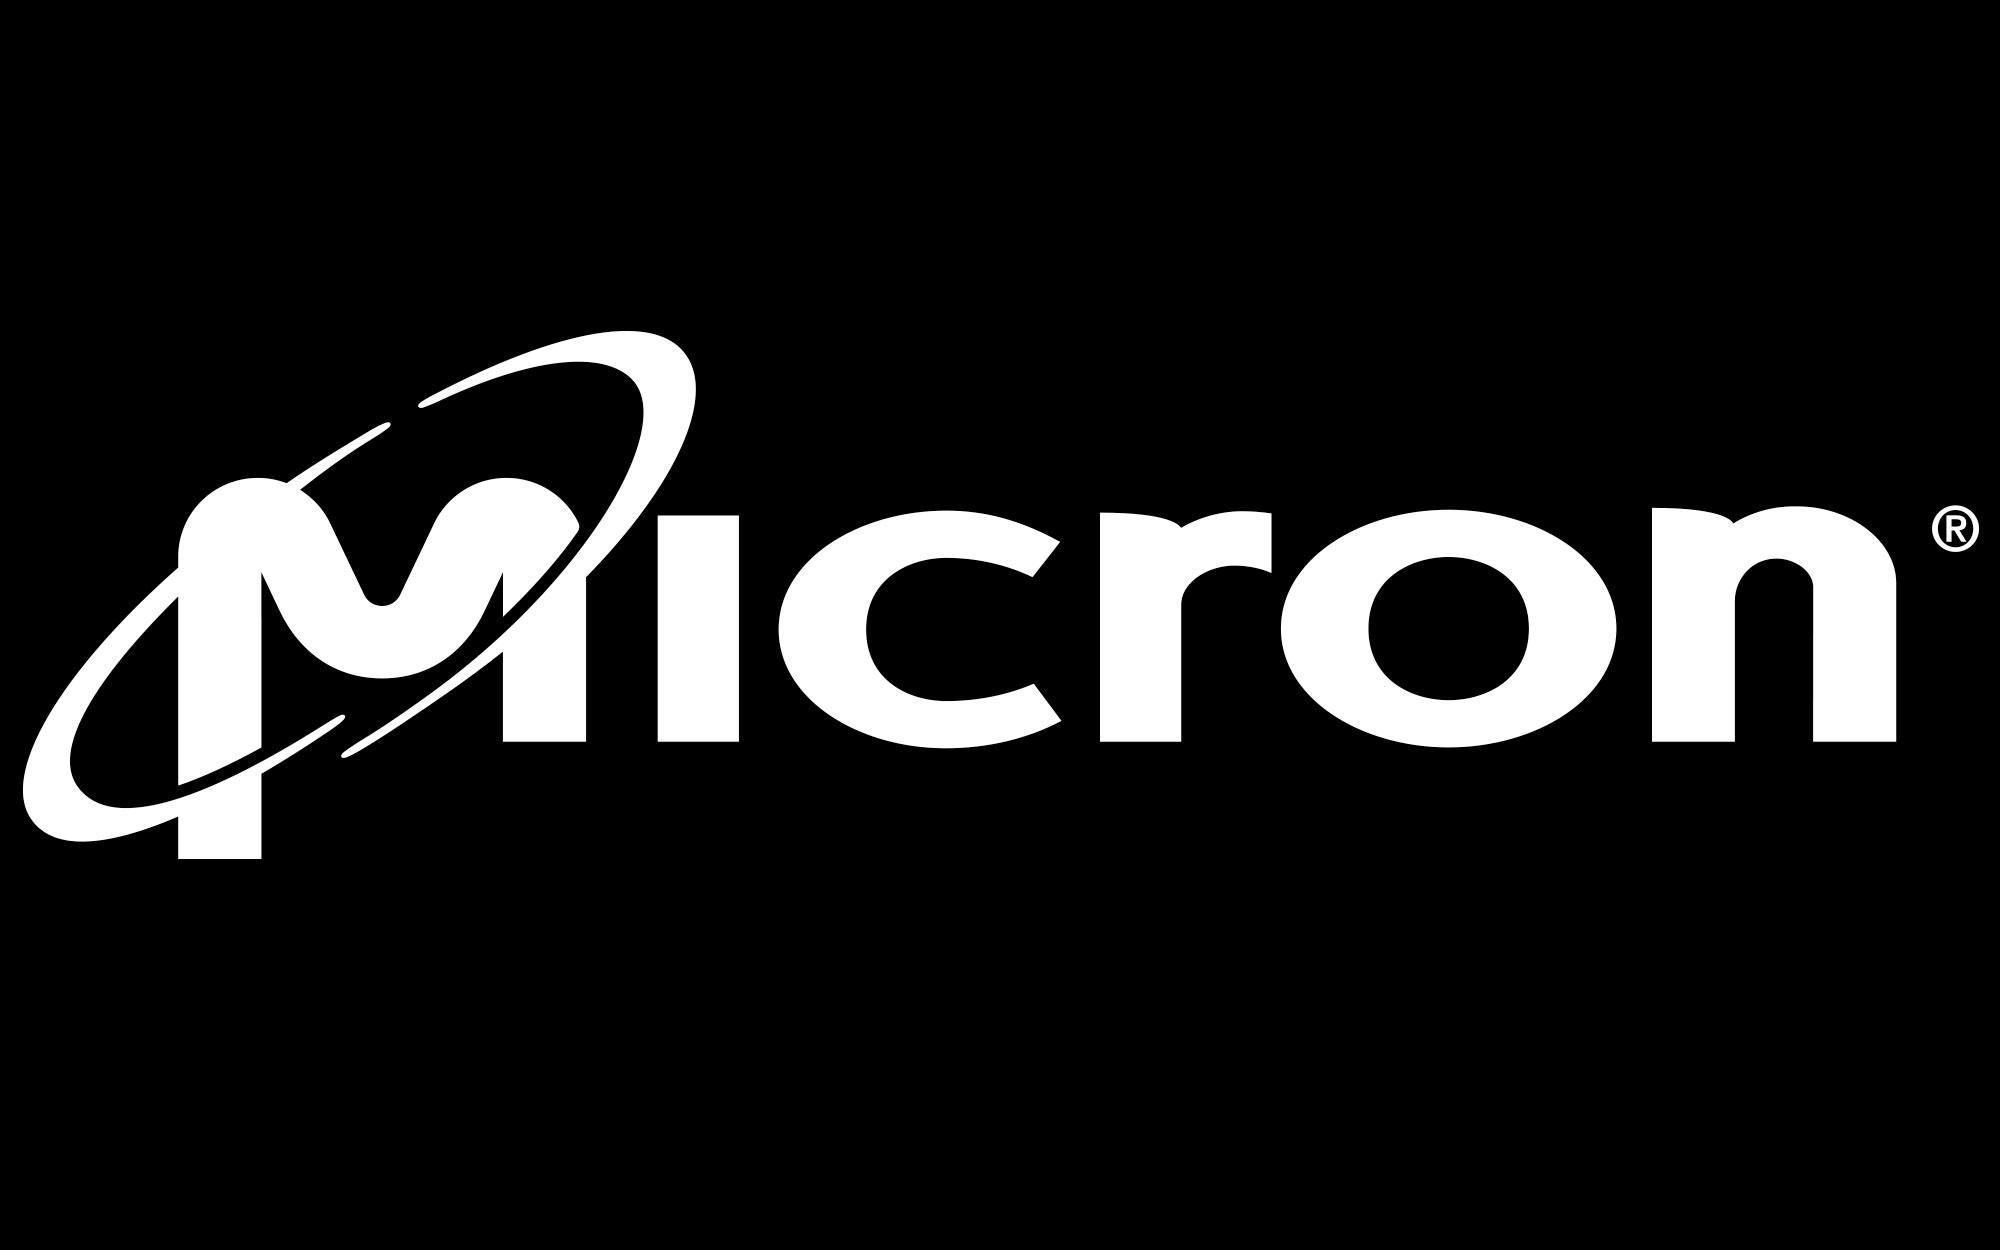 Micron Logo - What Were Institutions Up To With Micron Technology?